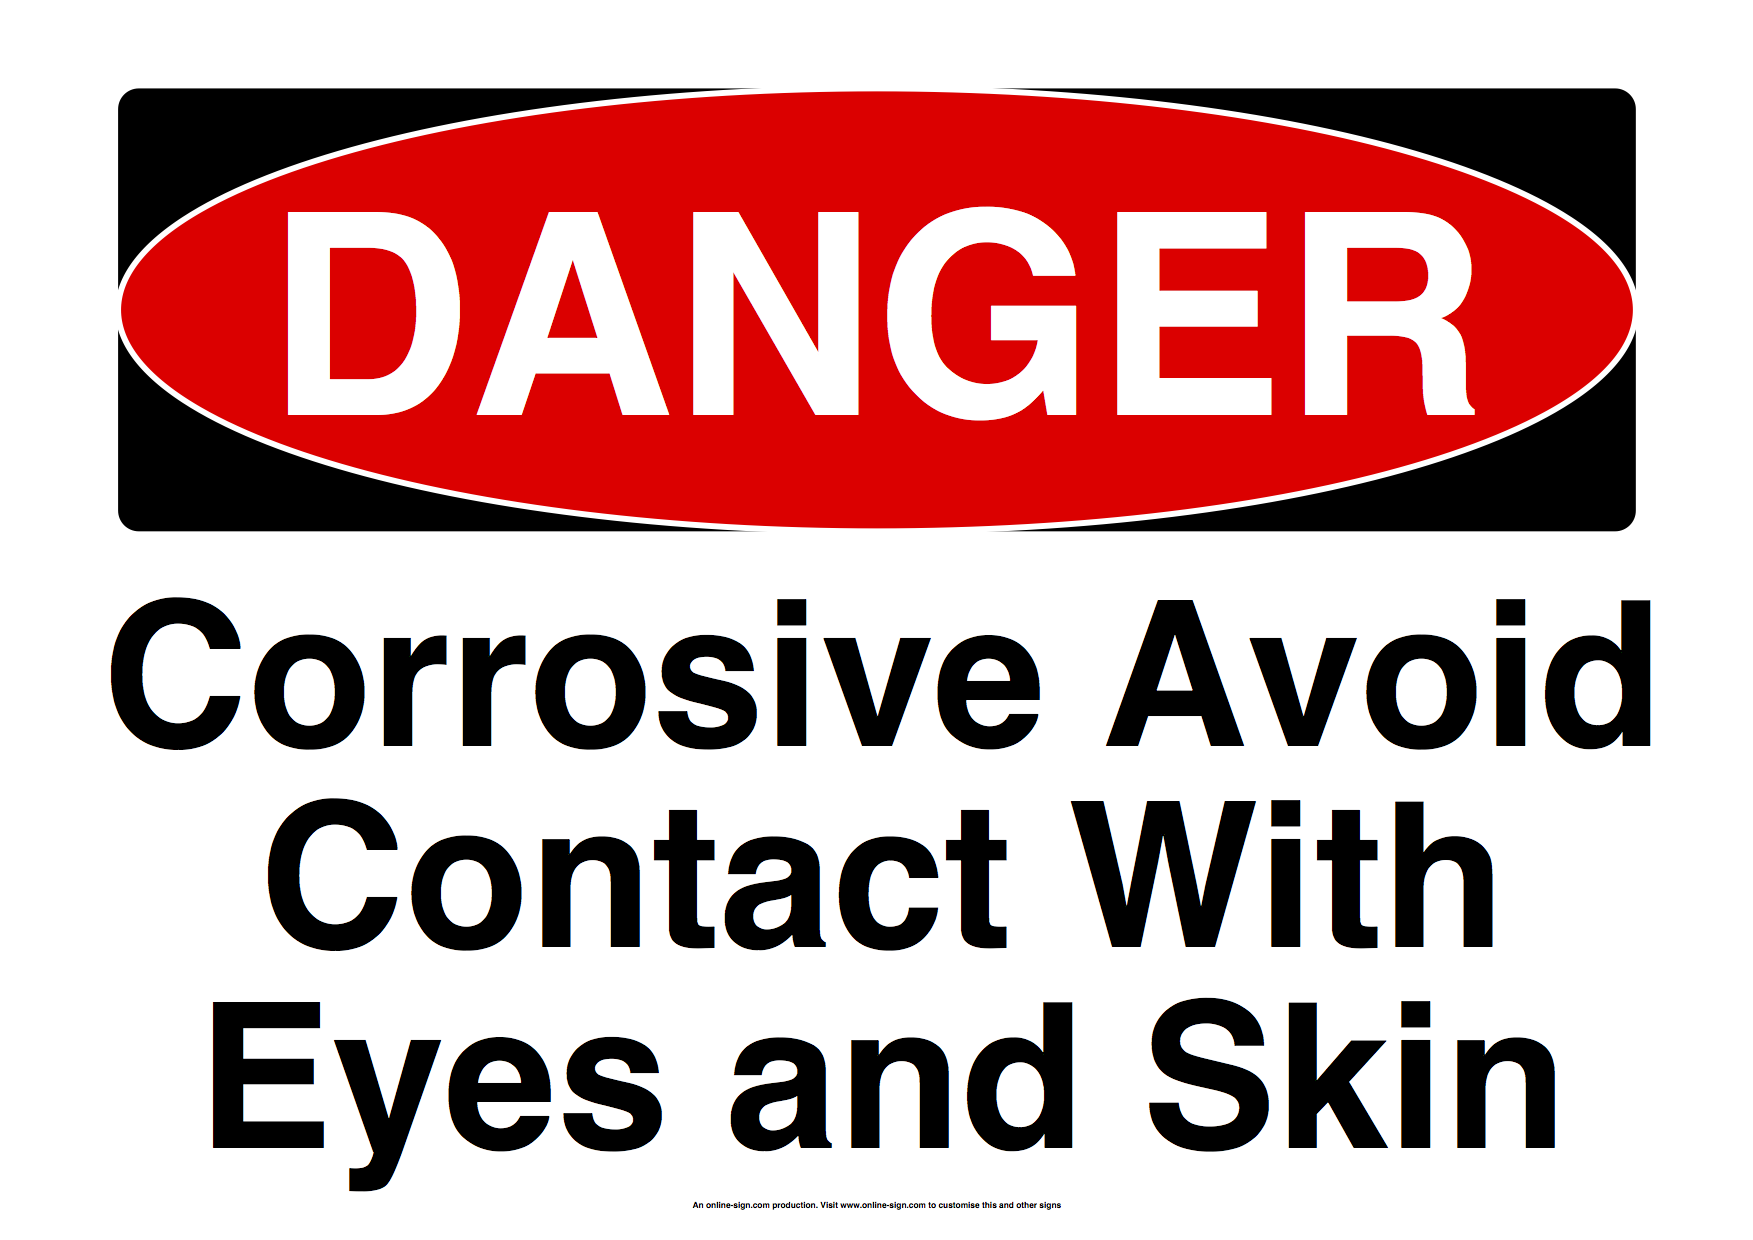 Danger Corrosive Avoid Contact With Eyes and Skin Sign - KJ Signs ...